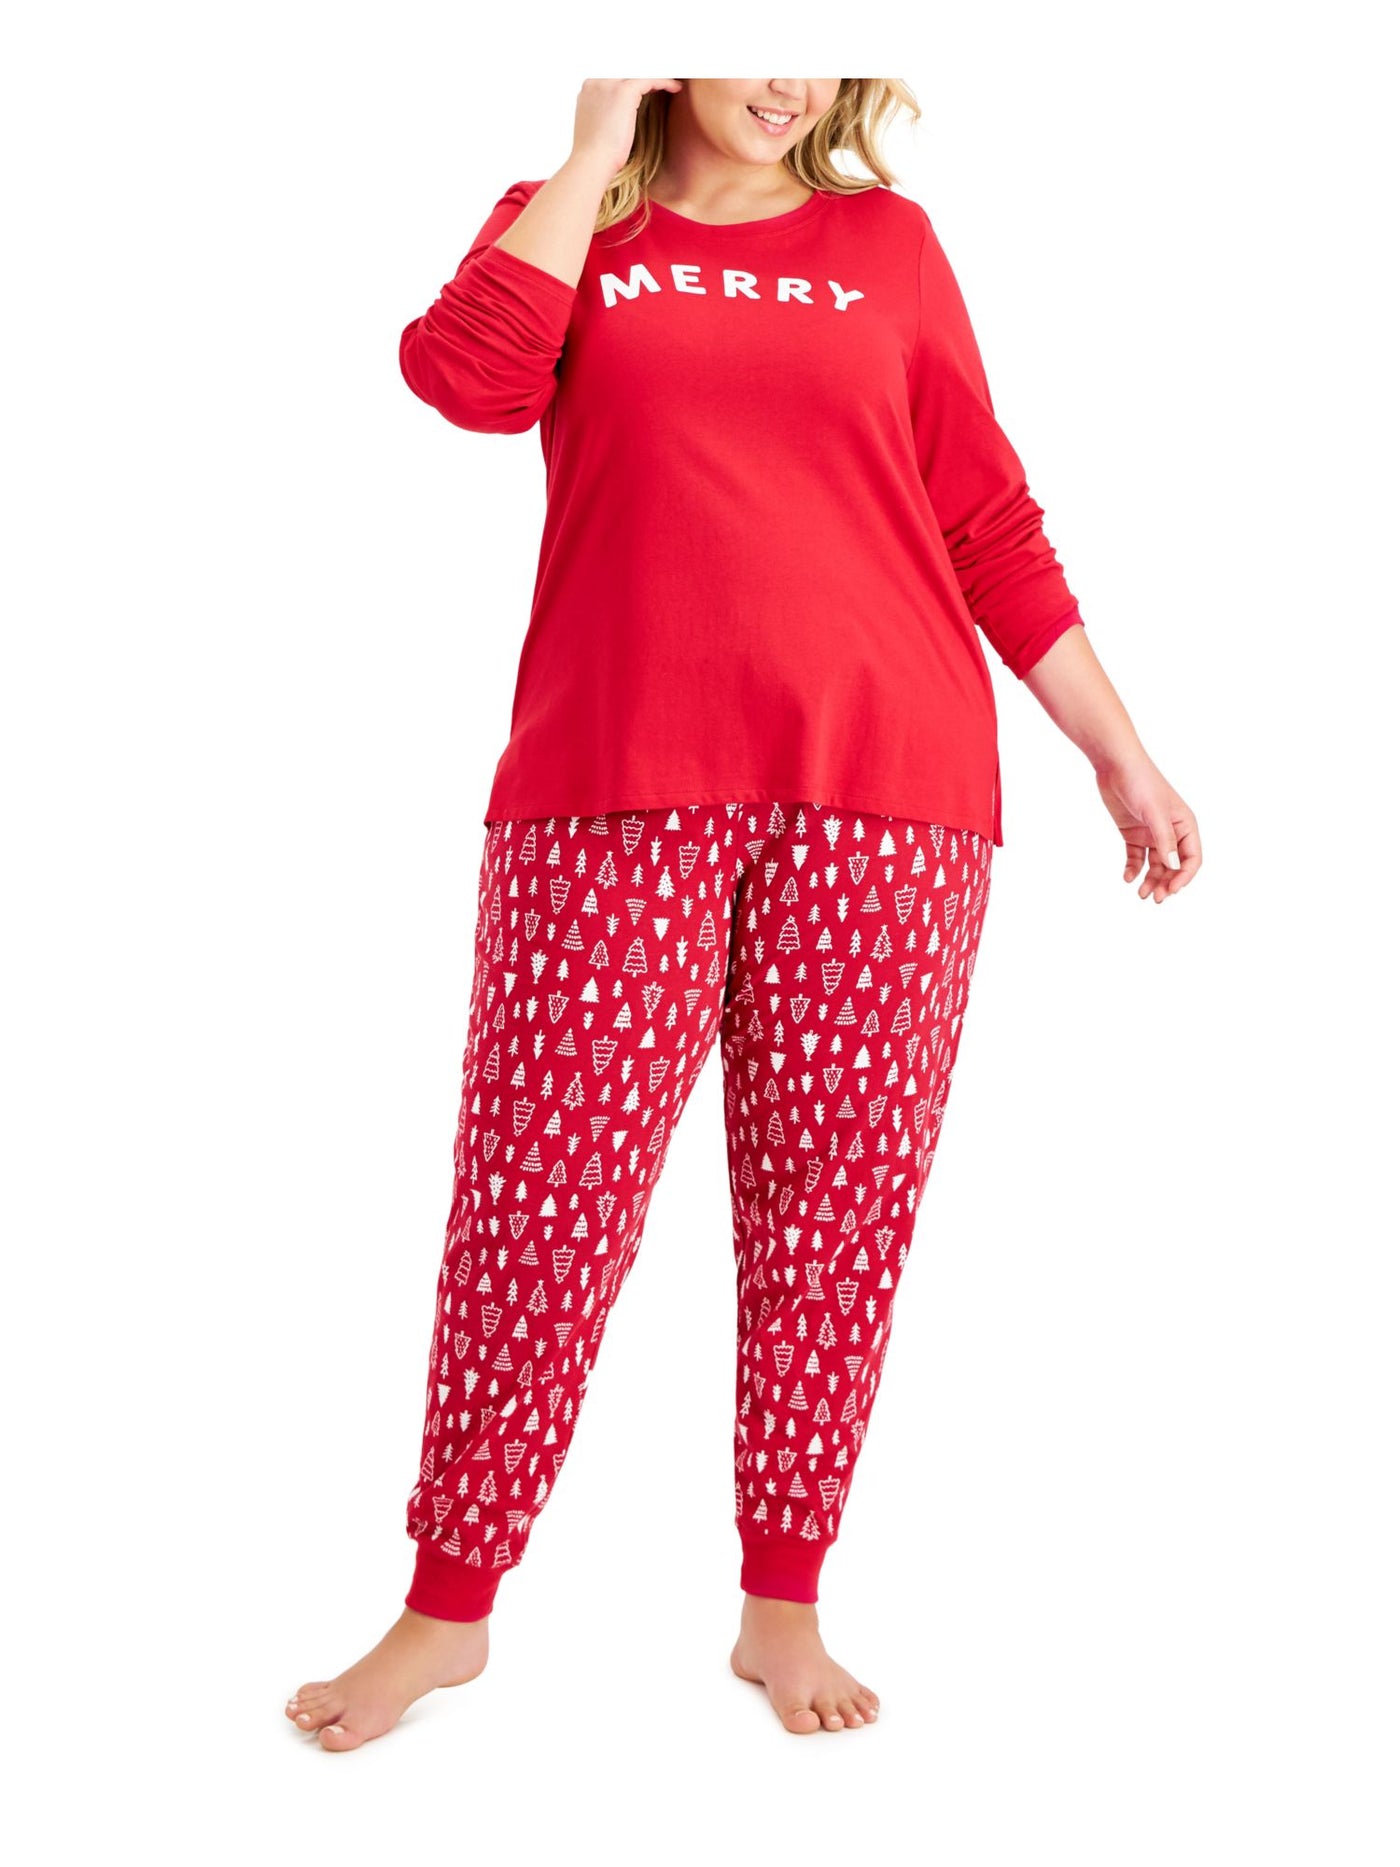 FAMILY PJs Womens Red Graphic Elastic Band T-Shirt Top Cuffed Pants Pajamas Plus 1X